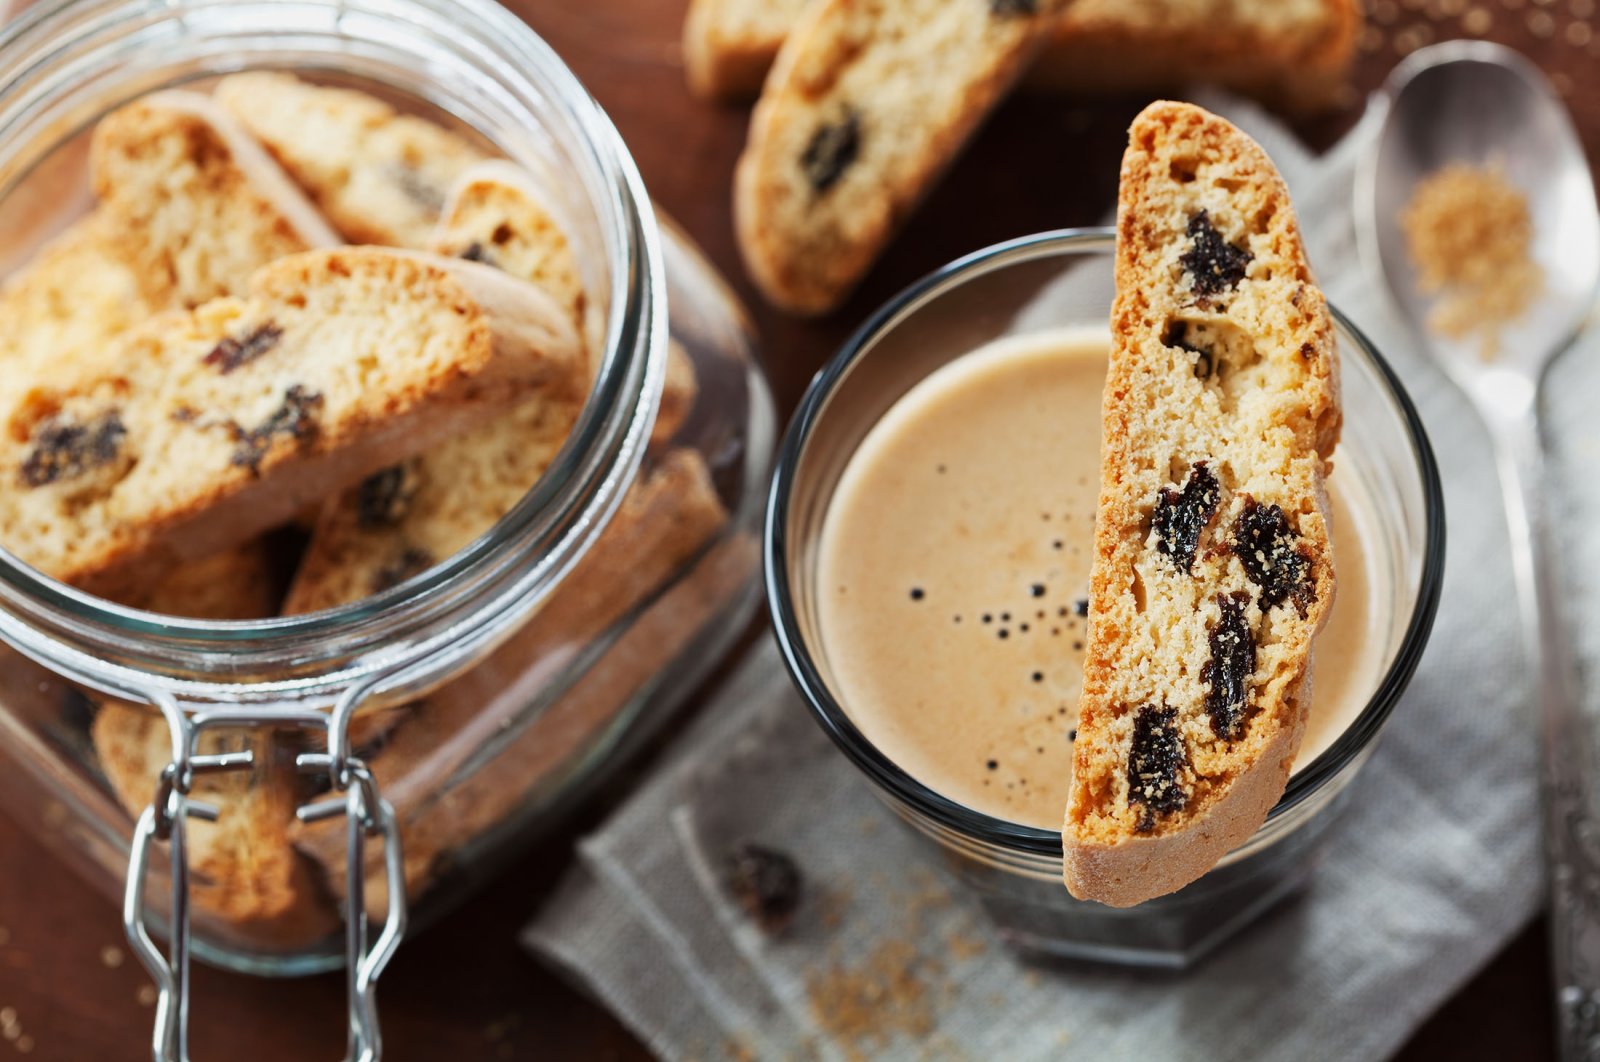 Biscotti is a sweet flavor that dates back to the Roman Empire. (Shutterstock Photo)